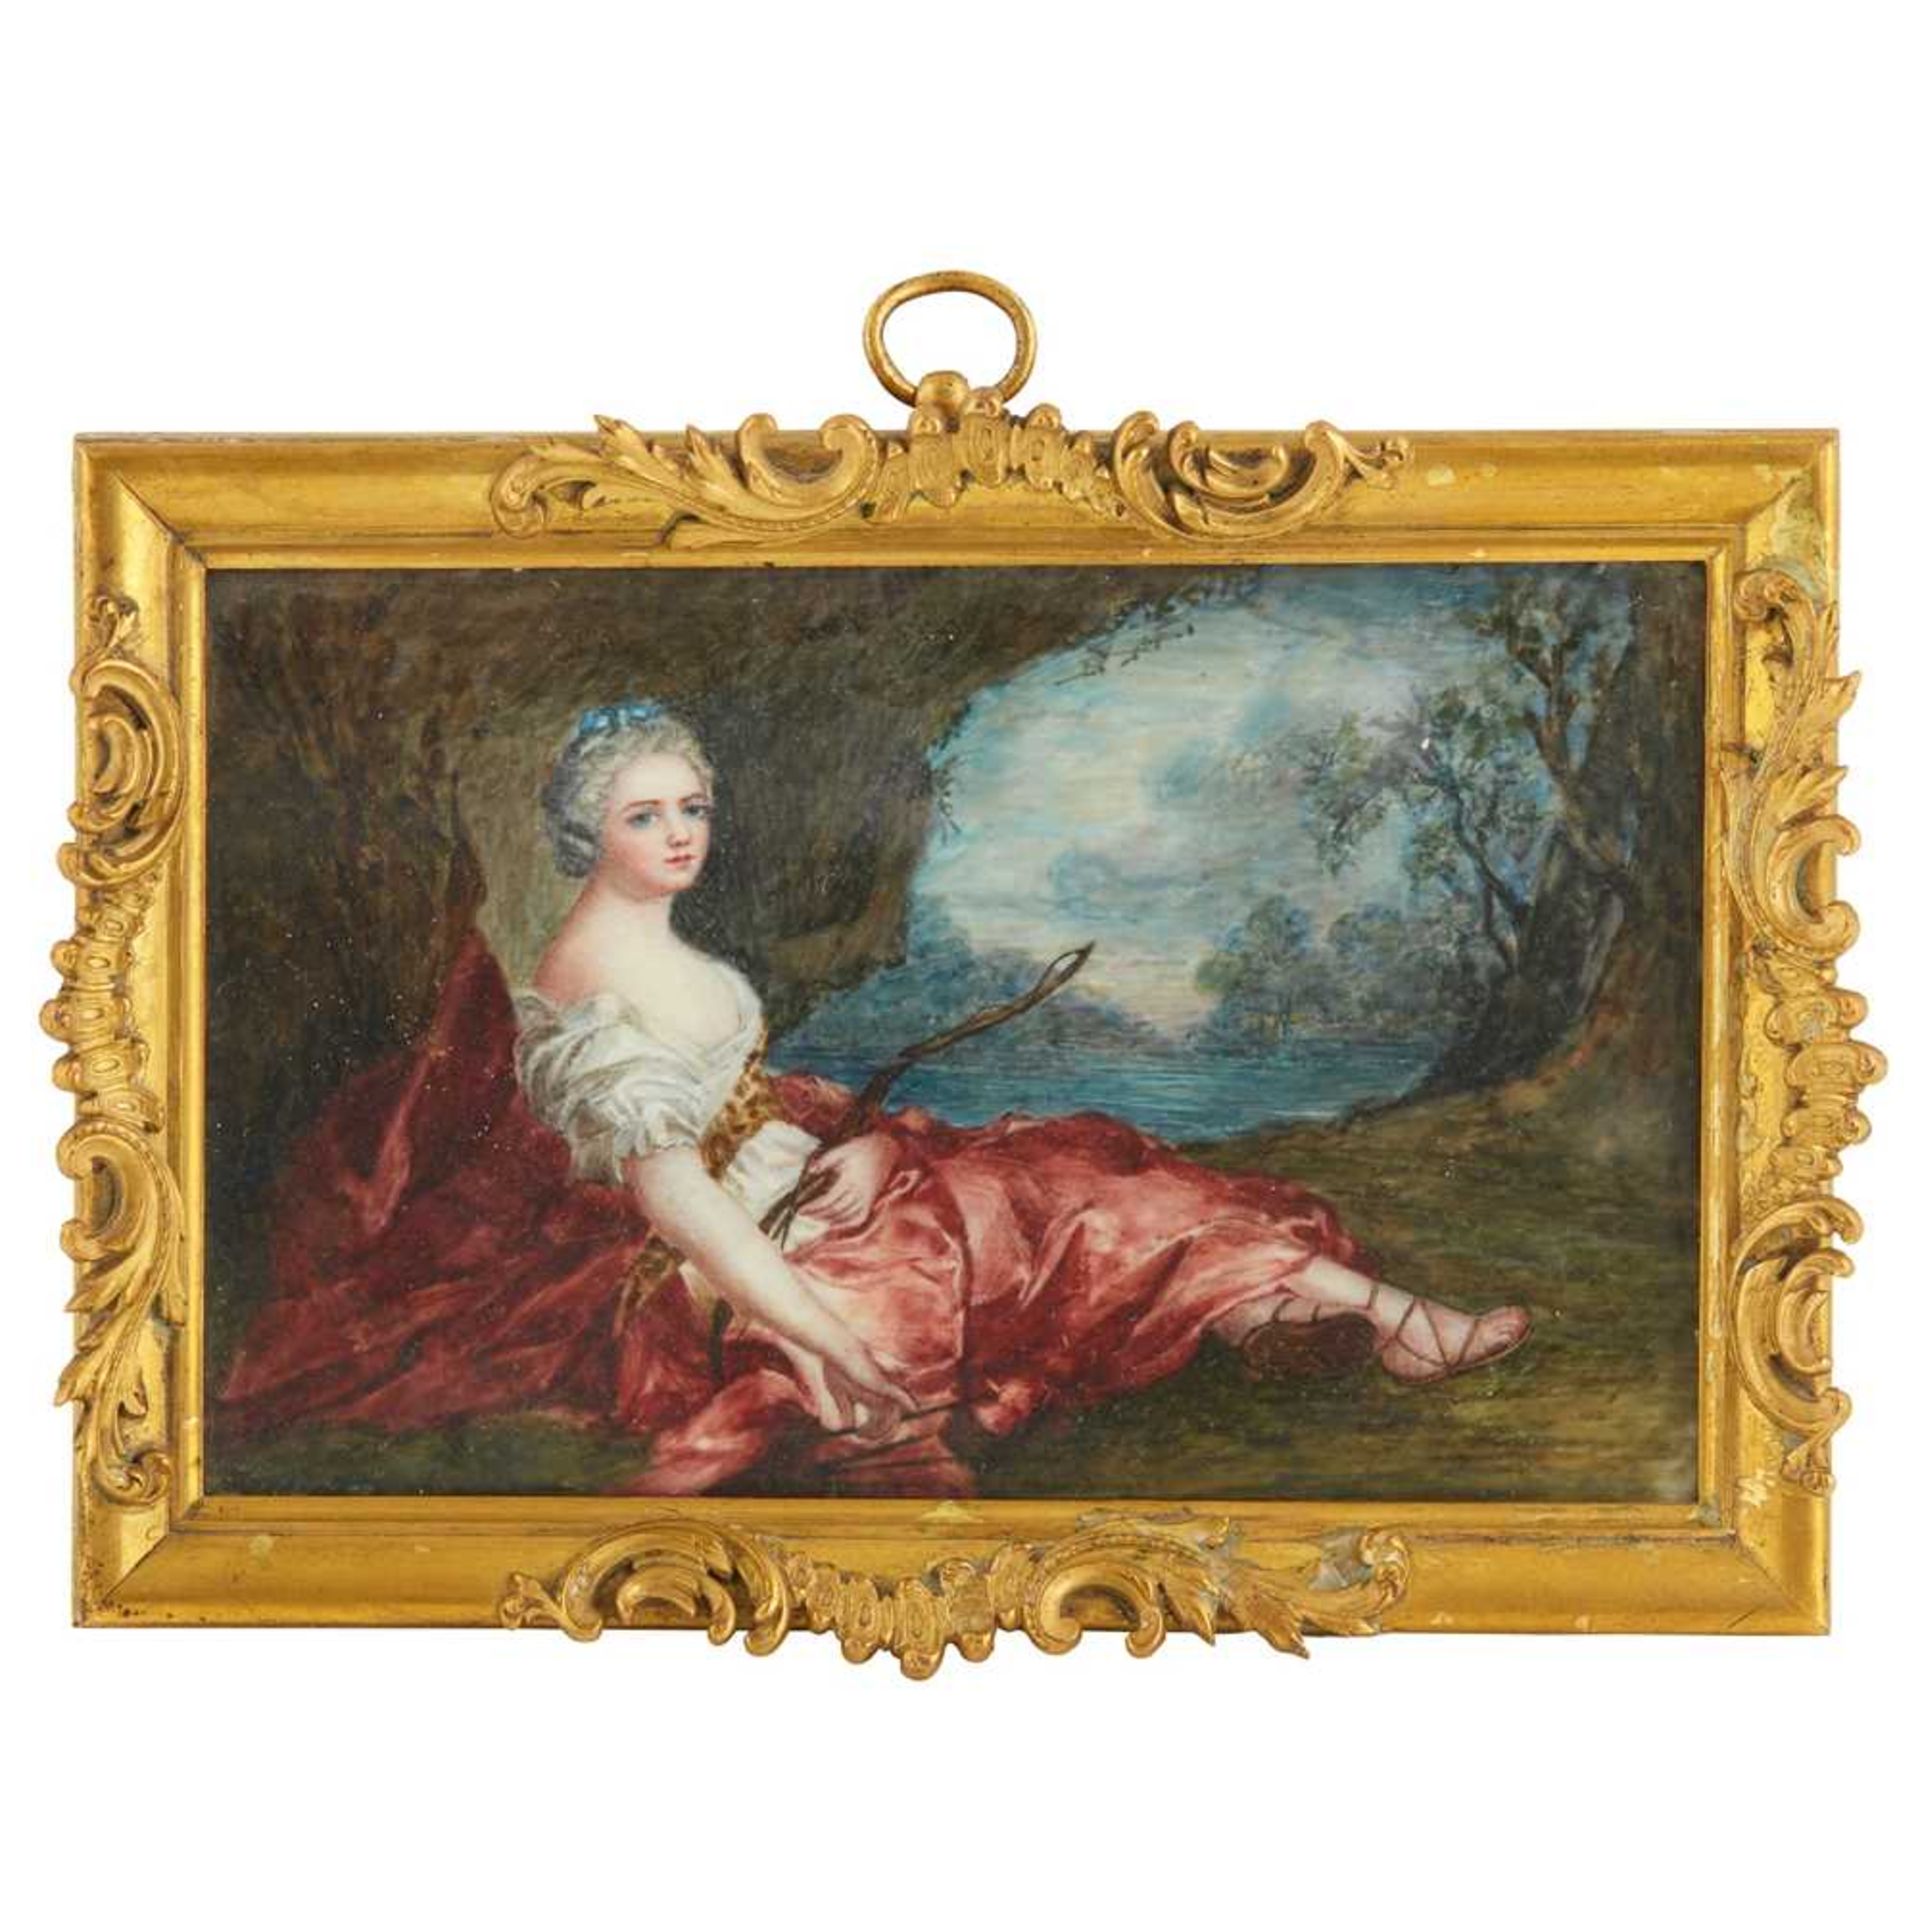 Y FRENCH SCHOOL, MINIATURE PAINTING OF A LADY AS DIANA THE HUNTRESS EARLY 19TH CENTURY